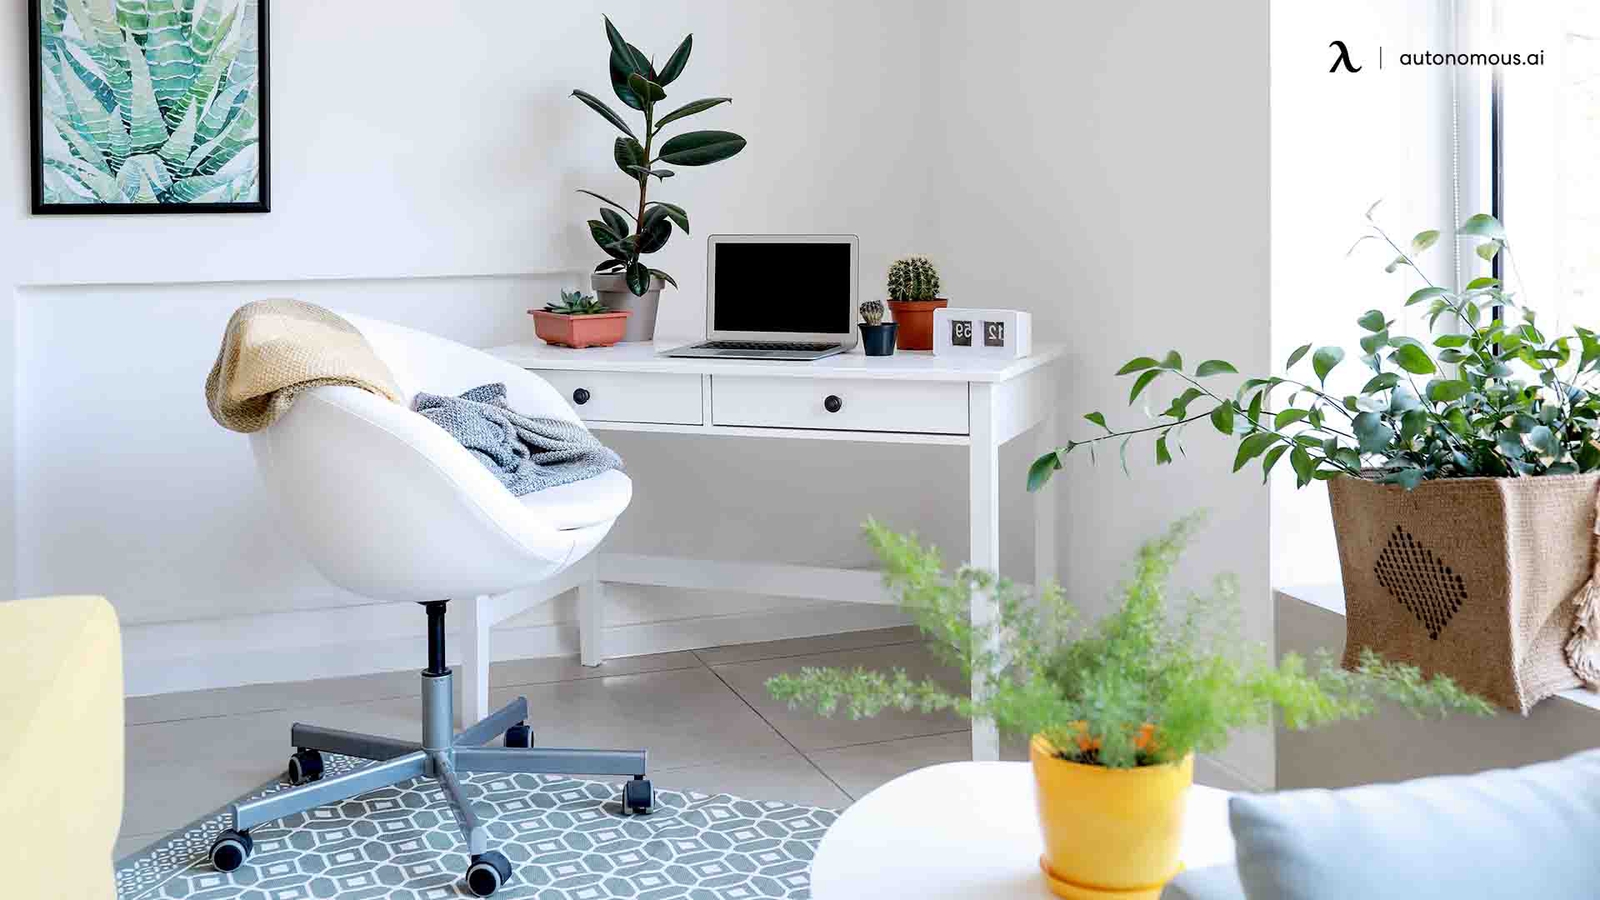 Create Your Better Workplace With "Biophilic" Design